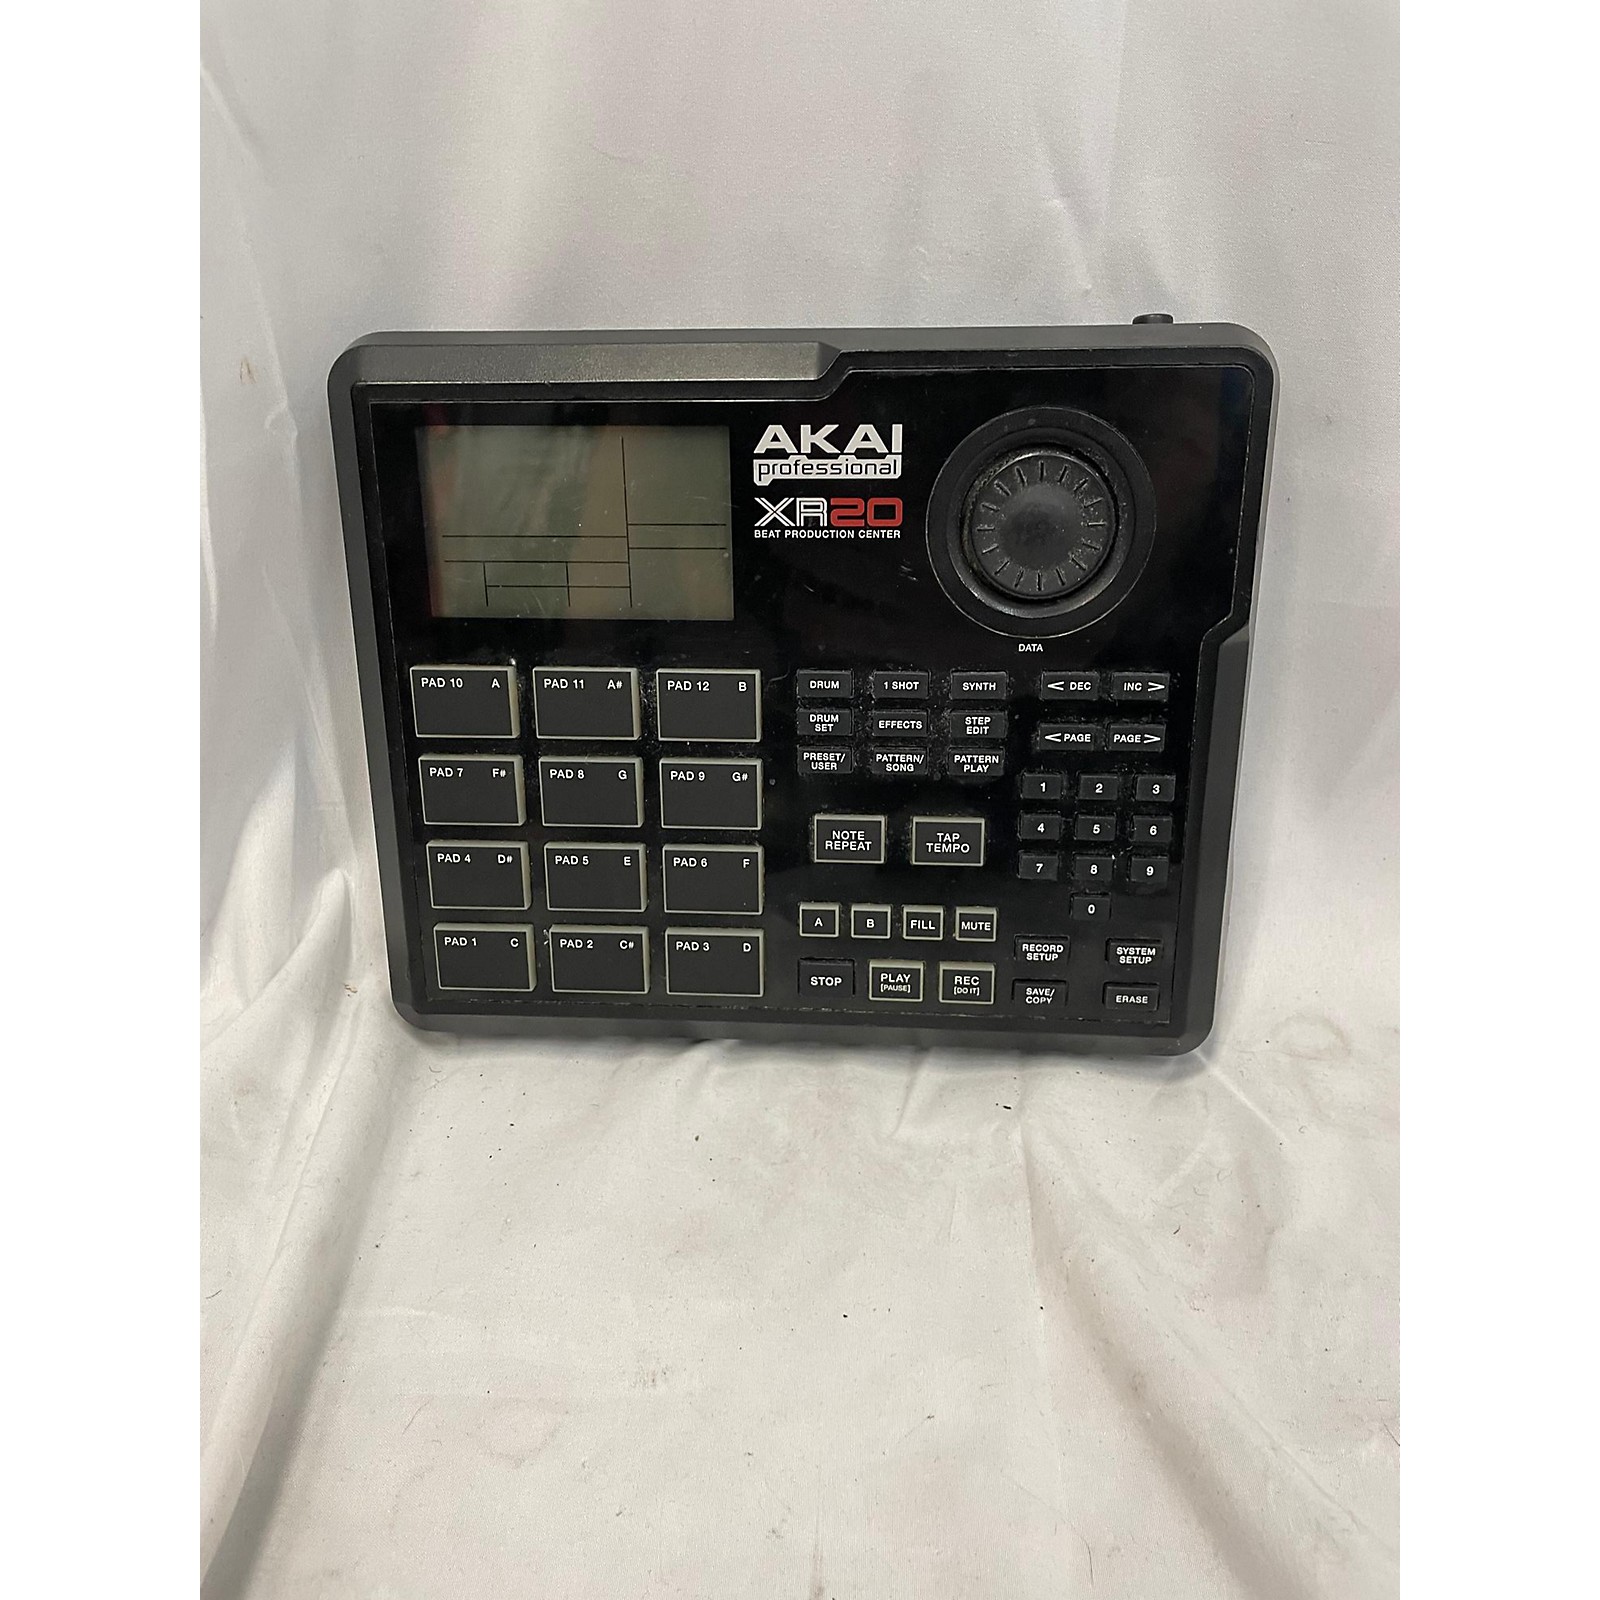 Used Akai Professional XR20 Beat Production Center Production